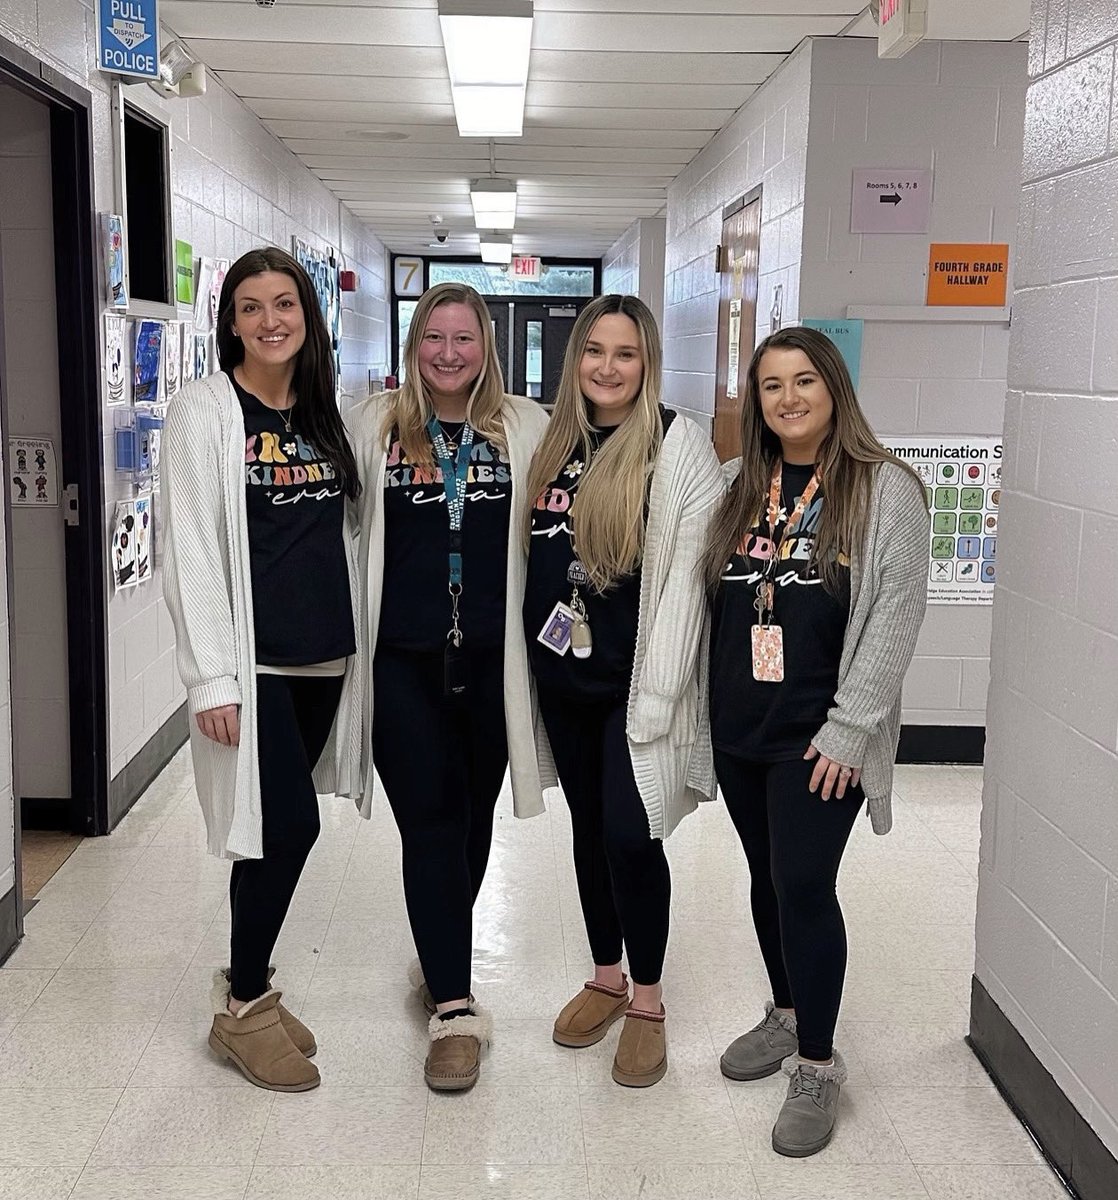 In our ✨kindness✨ era for #kindnessweek (and always) at Madison Park. 🥰